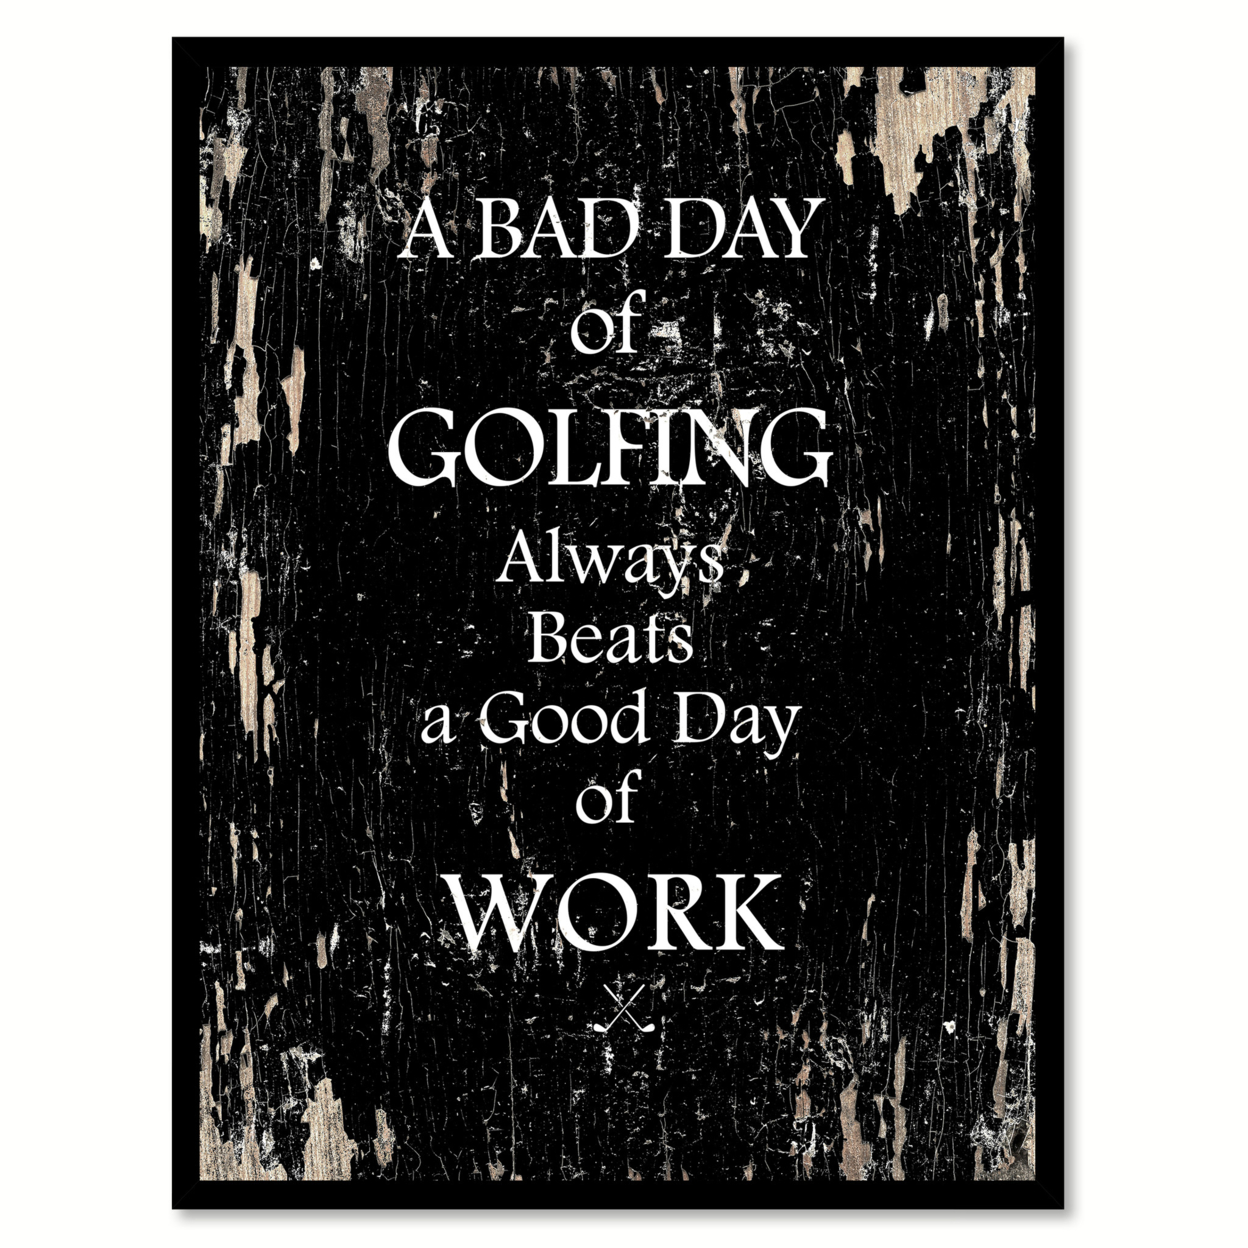 A Bad Day Of Golfing Always Beats A Good Day Of Work Saying Canvas Print with Picture Frame Home Decor Wall Art Gifts - 13"x17"